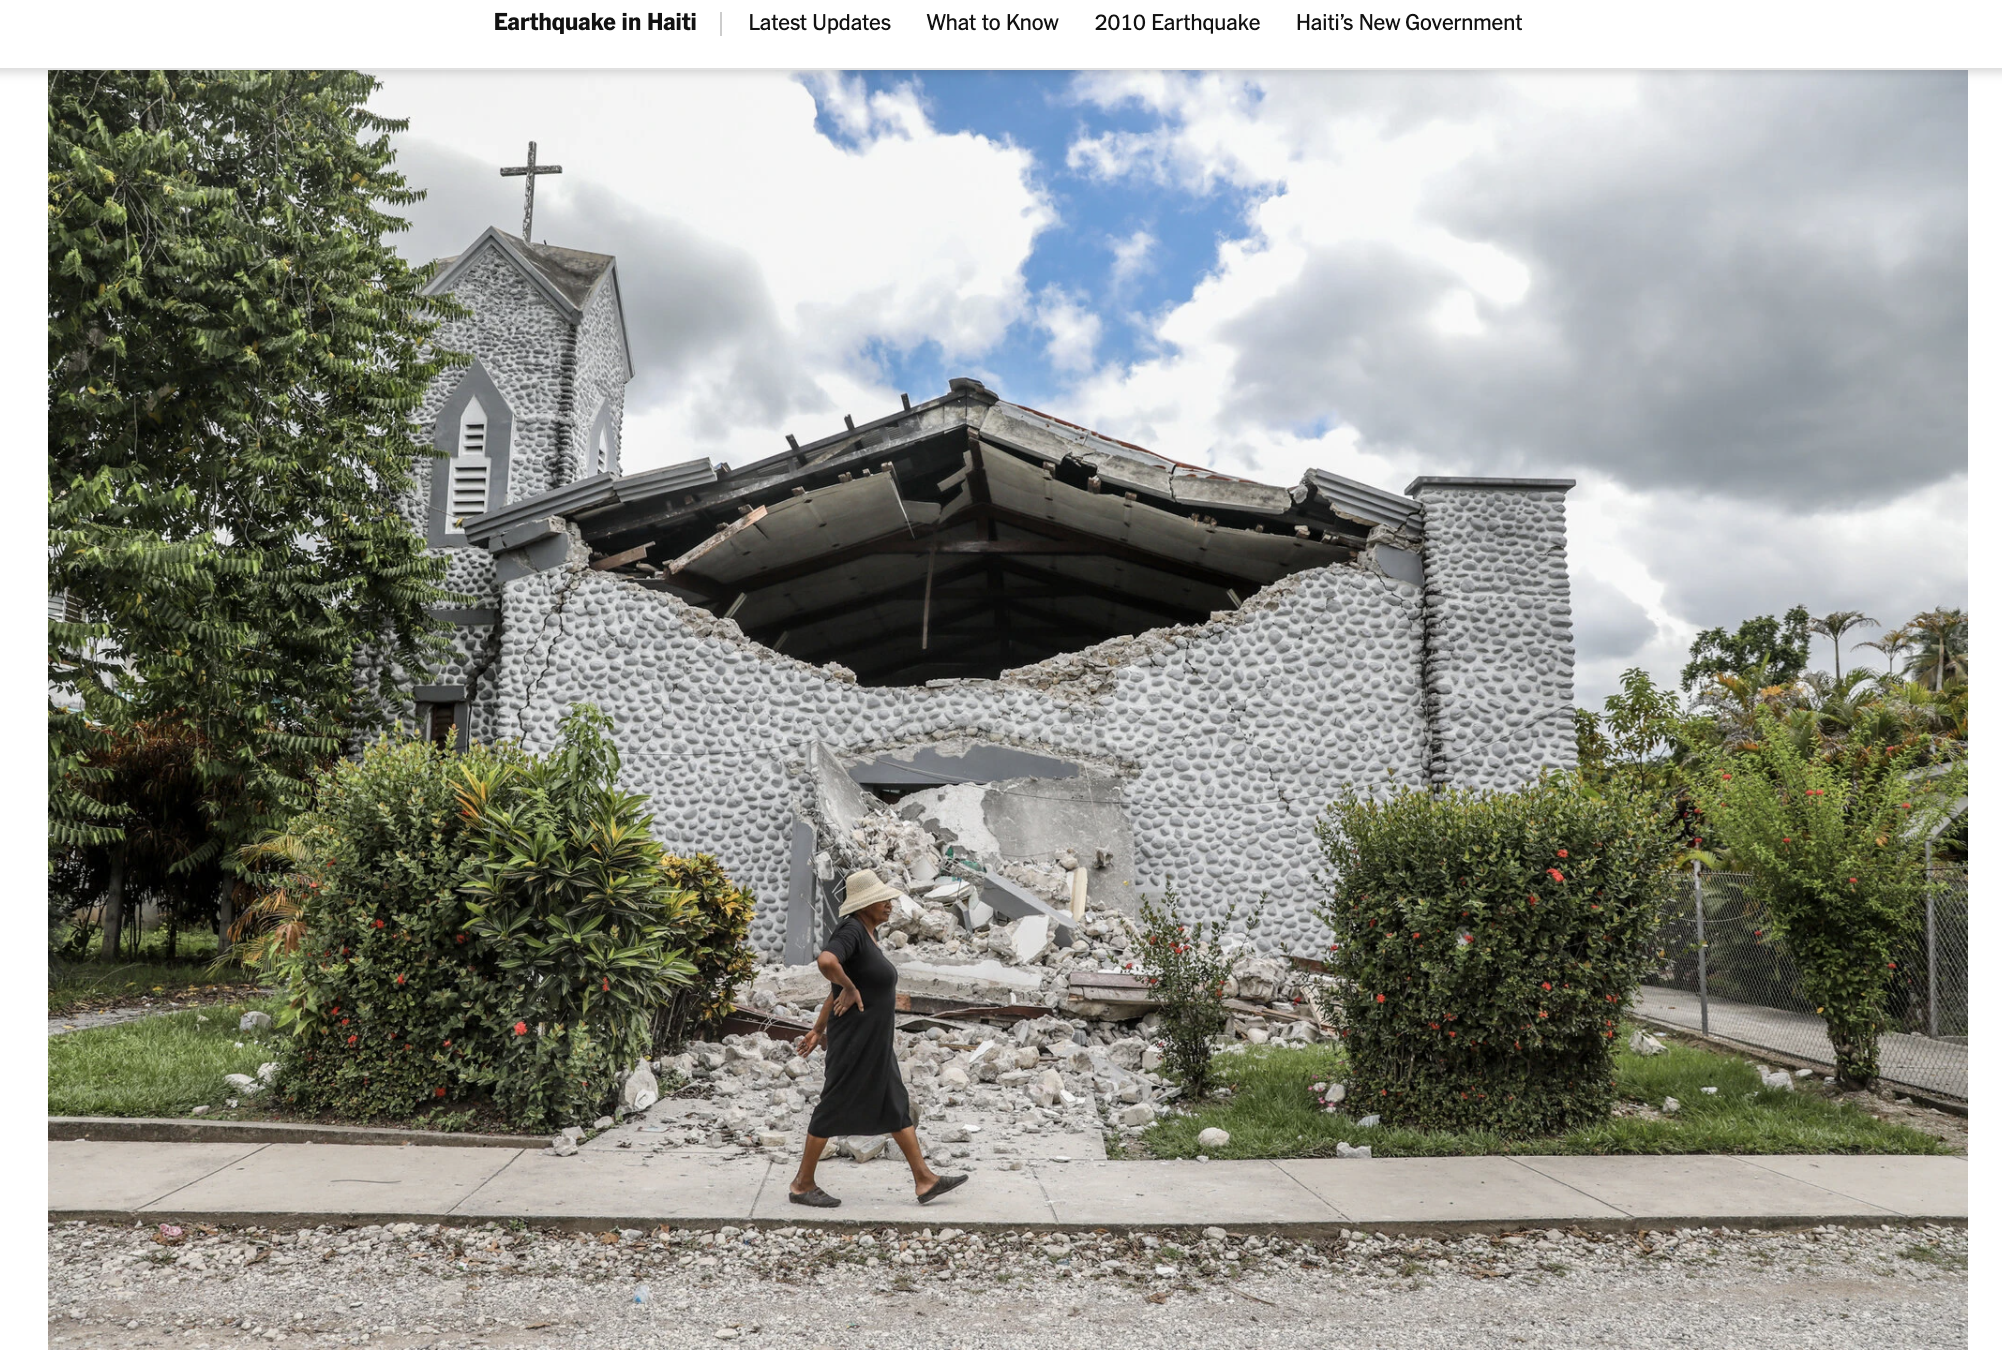 Thumbnail of New York Times: "˜I'm the Only Surgeon': After Haiti Quake, Thousands Seek Scarce Care